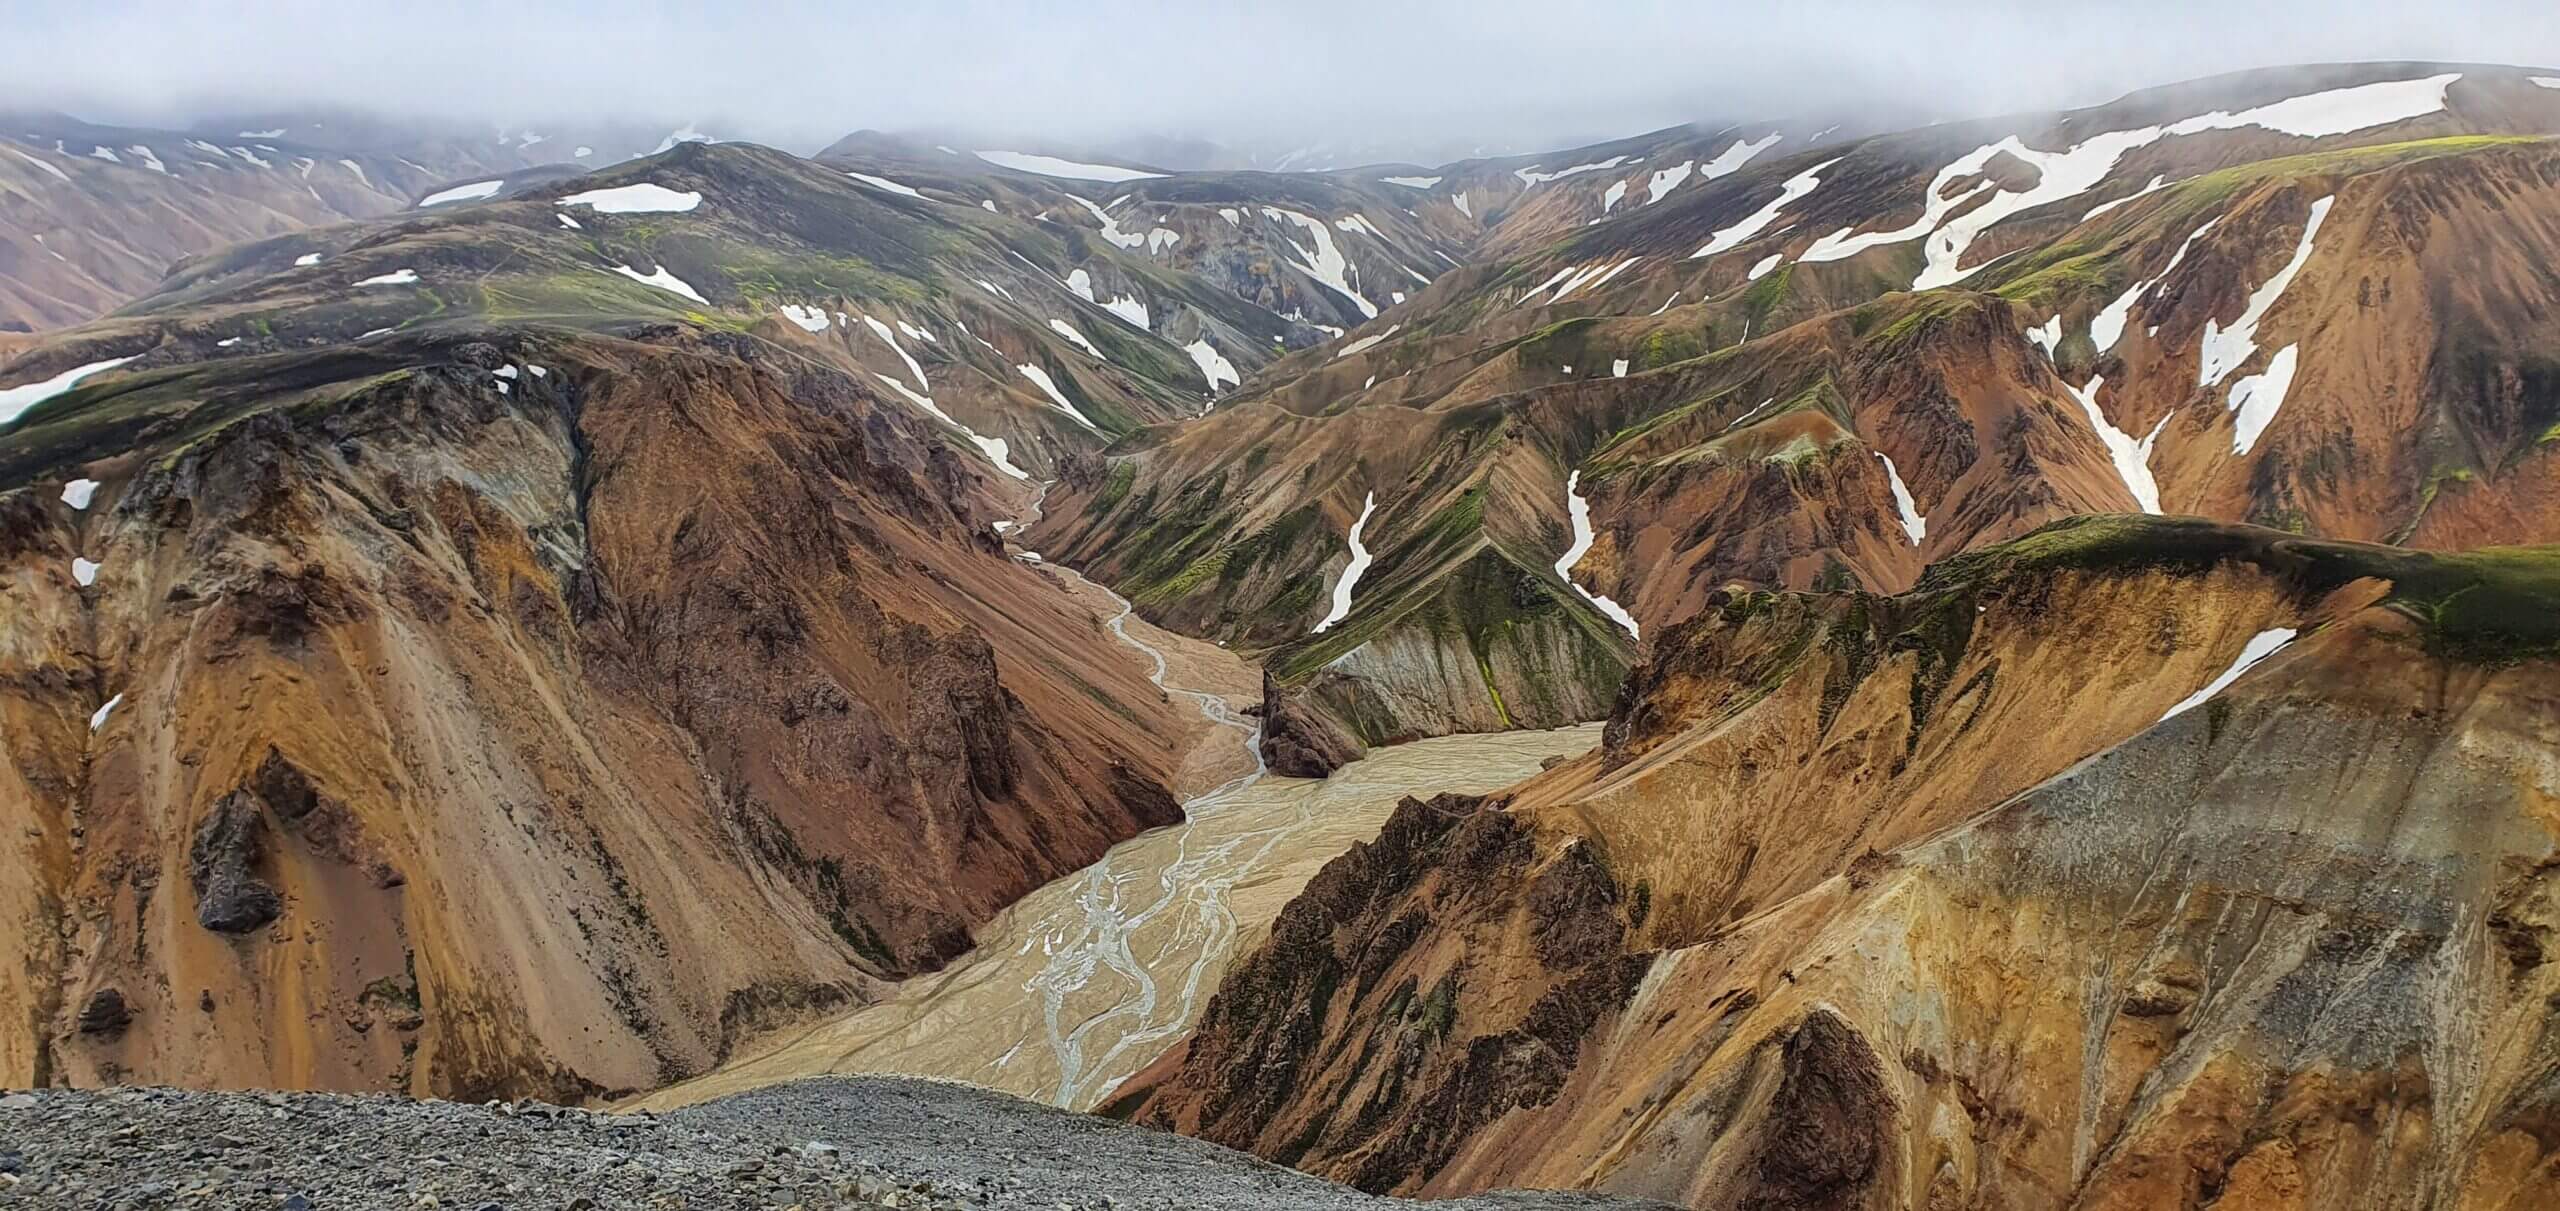 Day 4 – Landmannalaugar and Highlands in the north